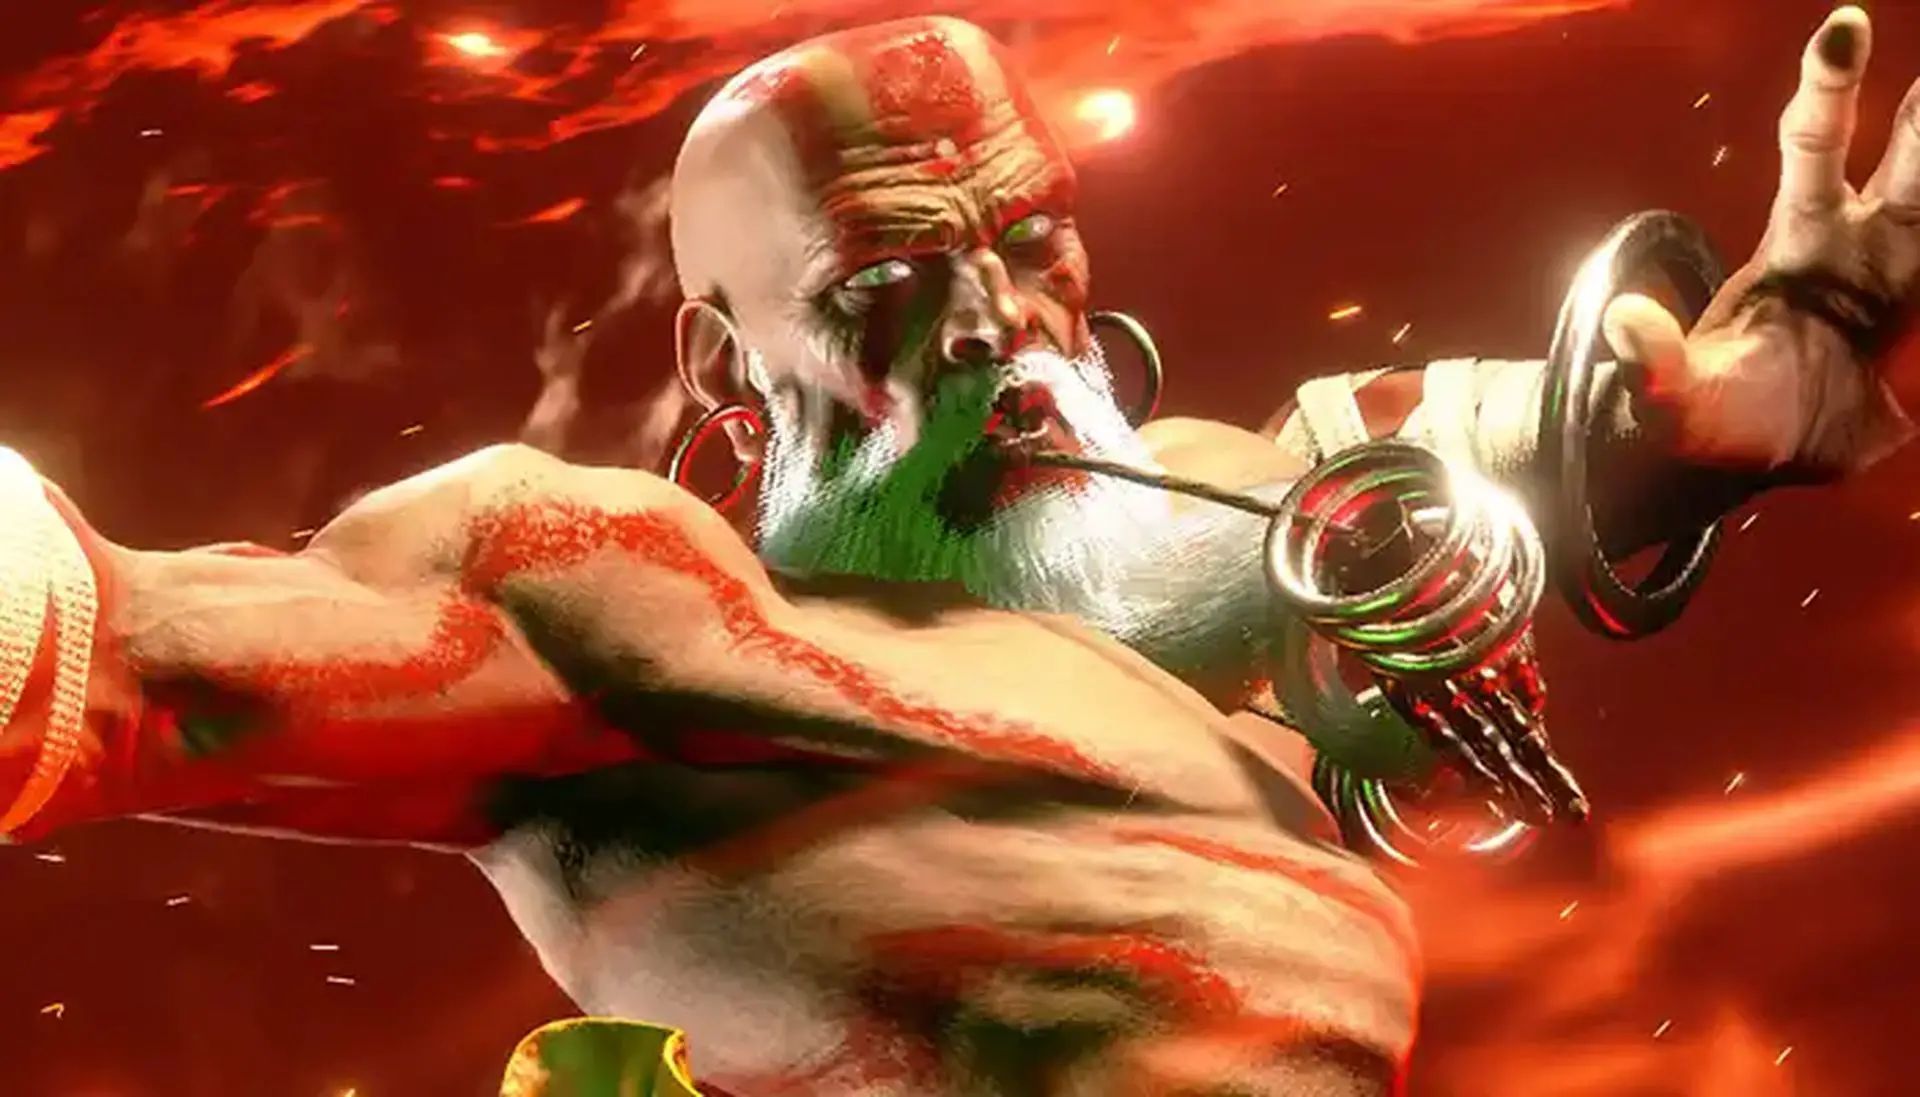 Street Fighter 6 gift guide: